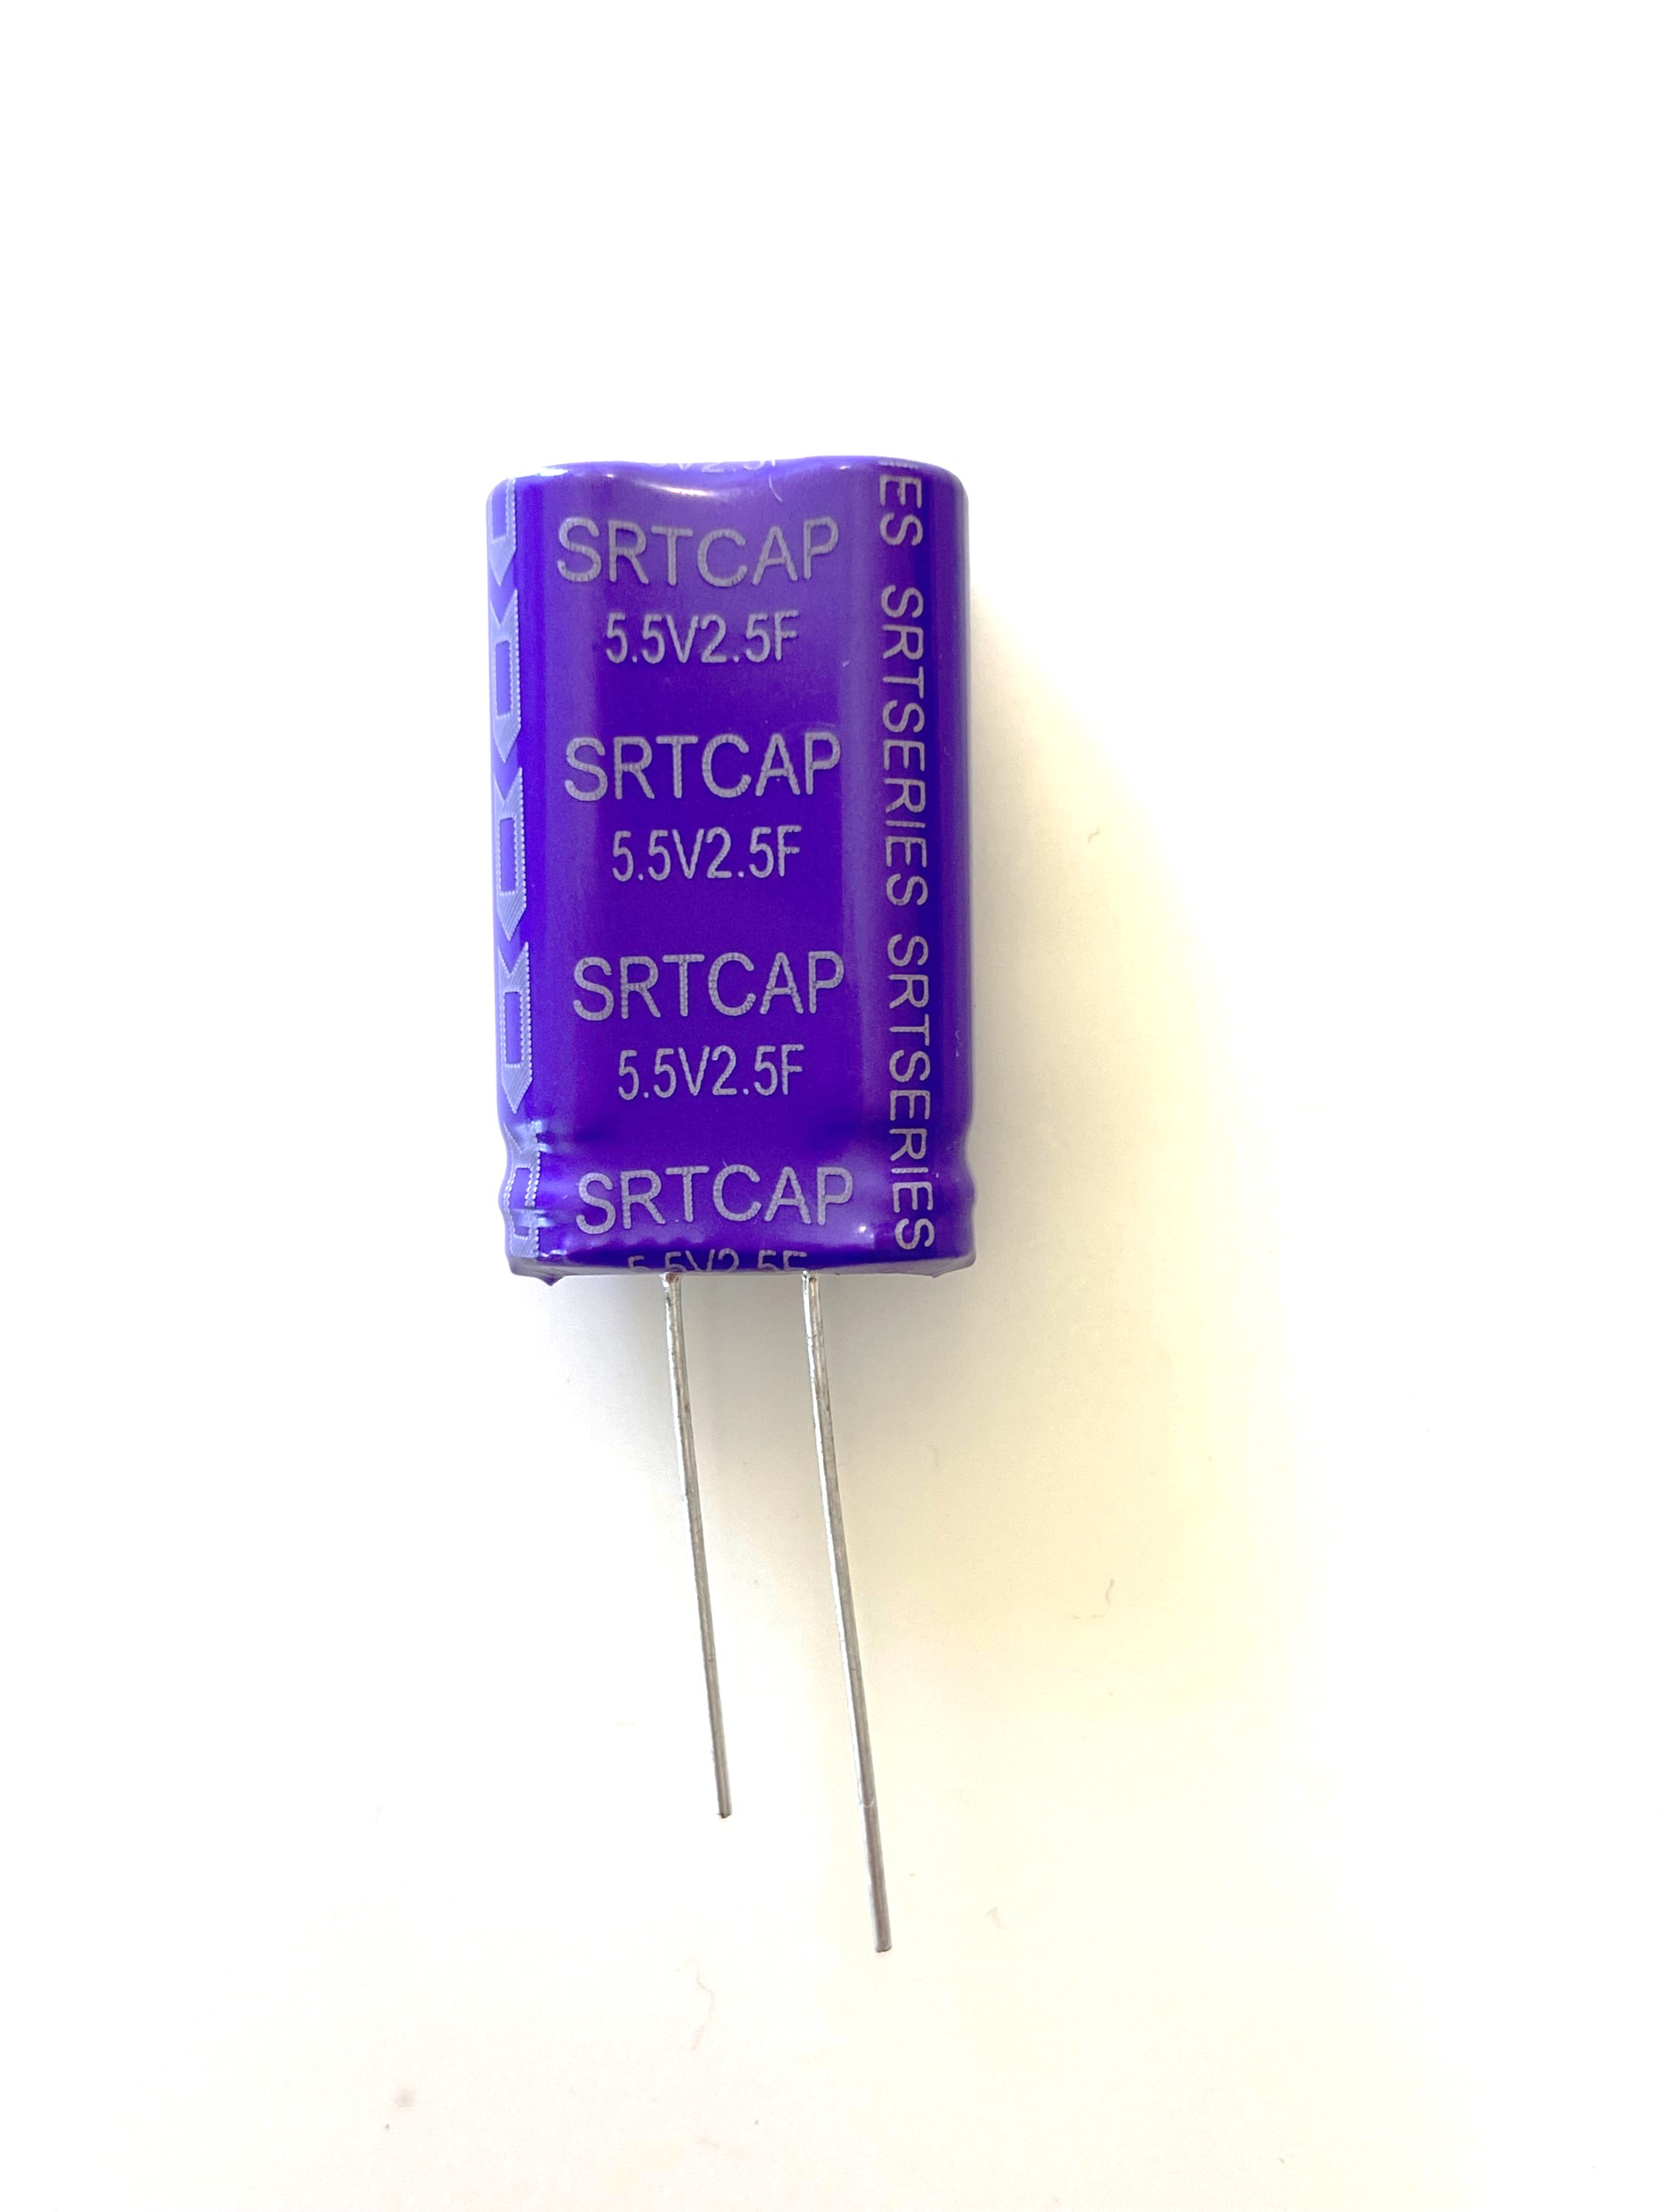 the part number is SCM5R5255A